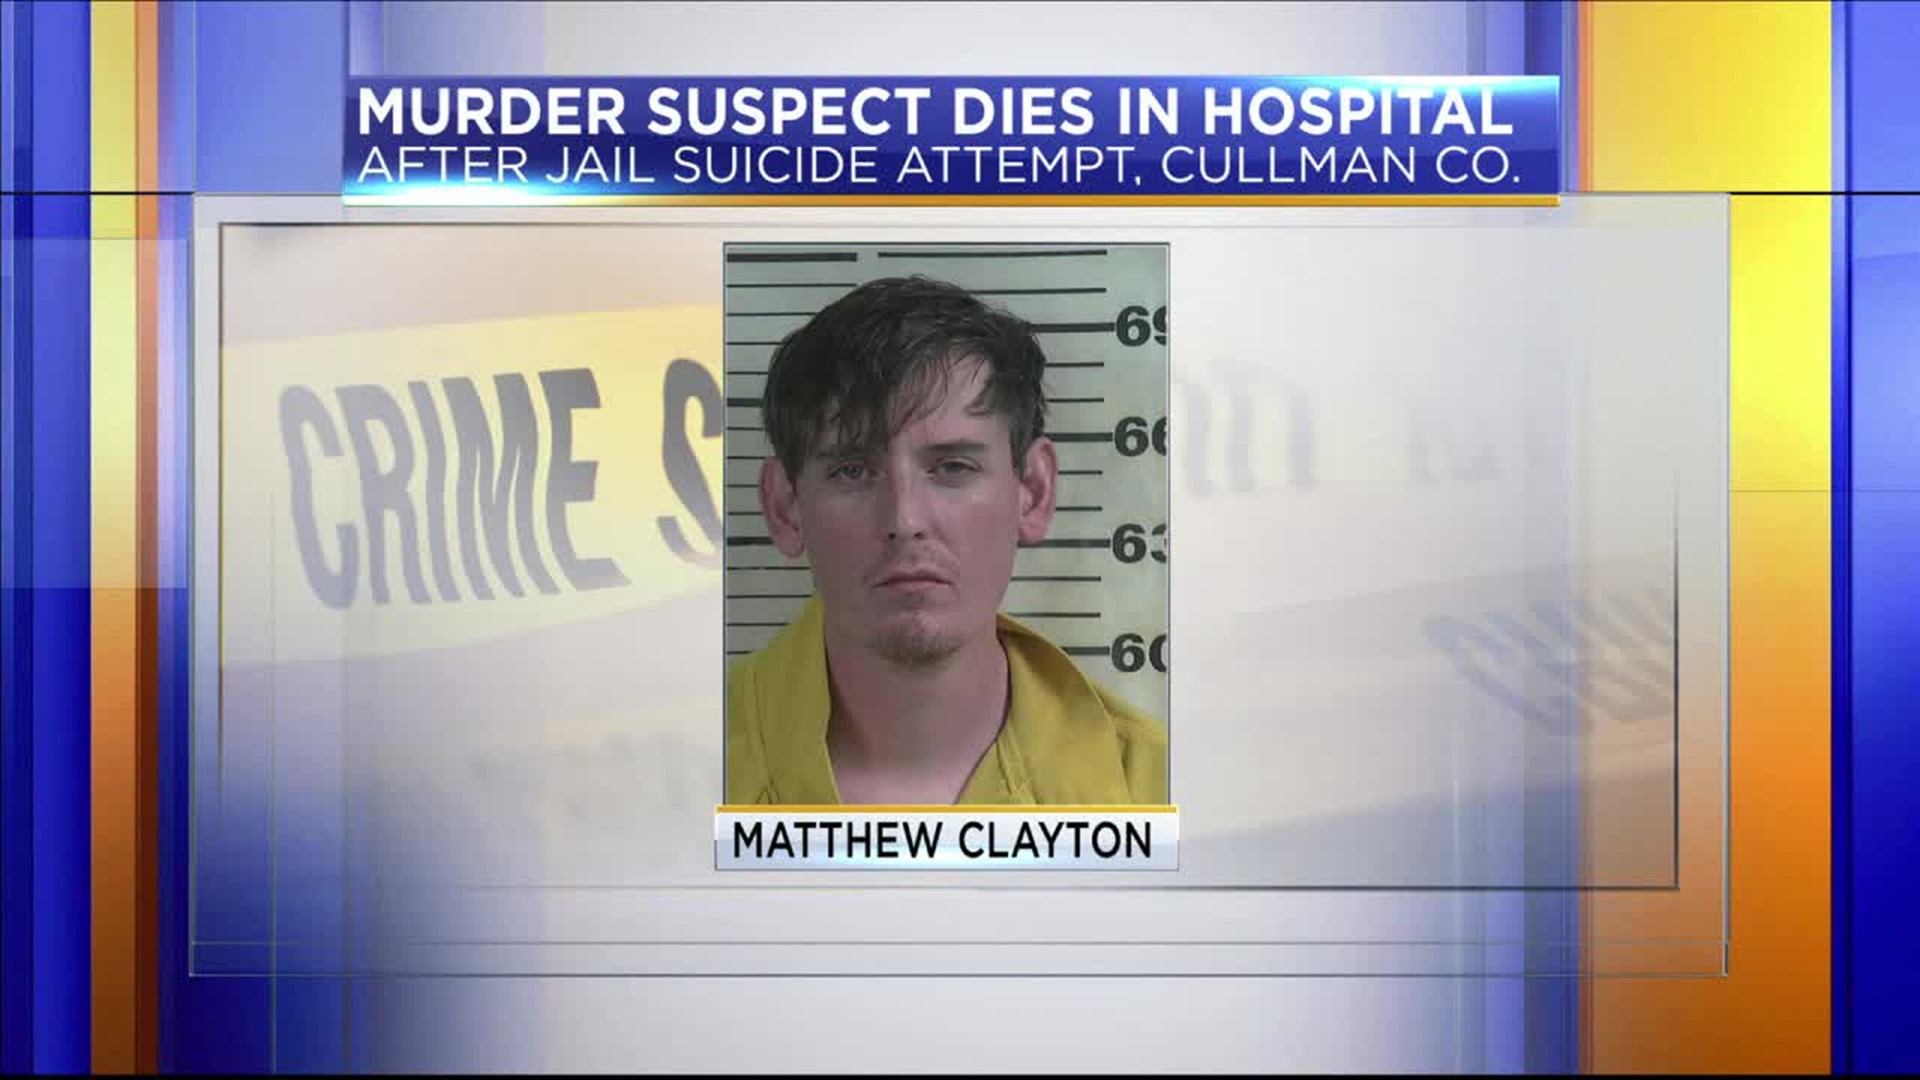 Cullman County Coroner says 30-year-old Matthew Clayton died Tuesday after attempting suicide in the county jail Friday night.